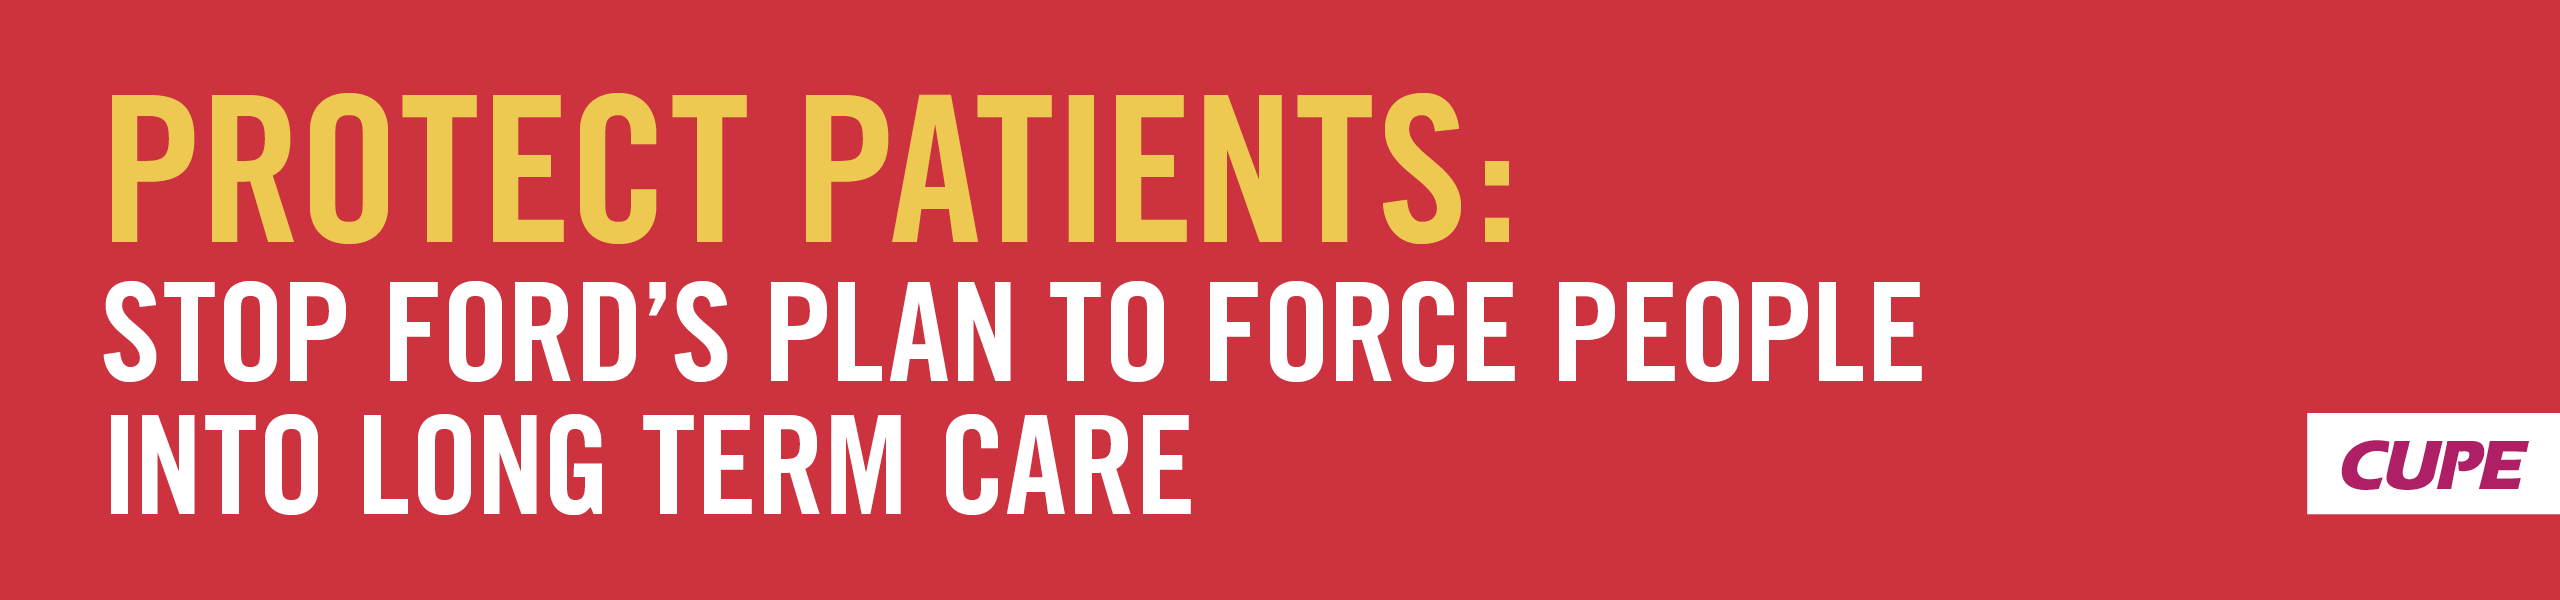 PROTECT PATIENTS: STOP FORD'S PLAN TO FORCE PEOPLE INTO LONG TERM CARE